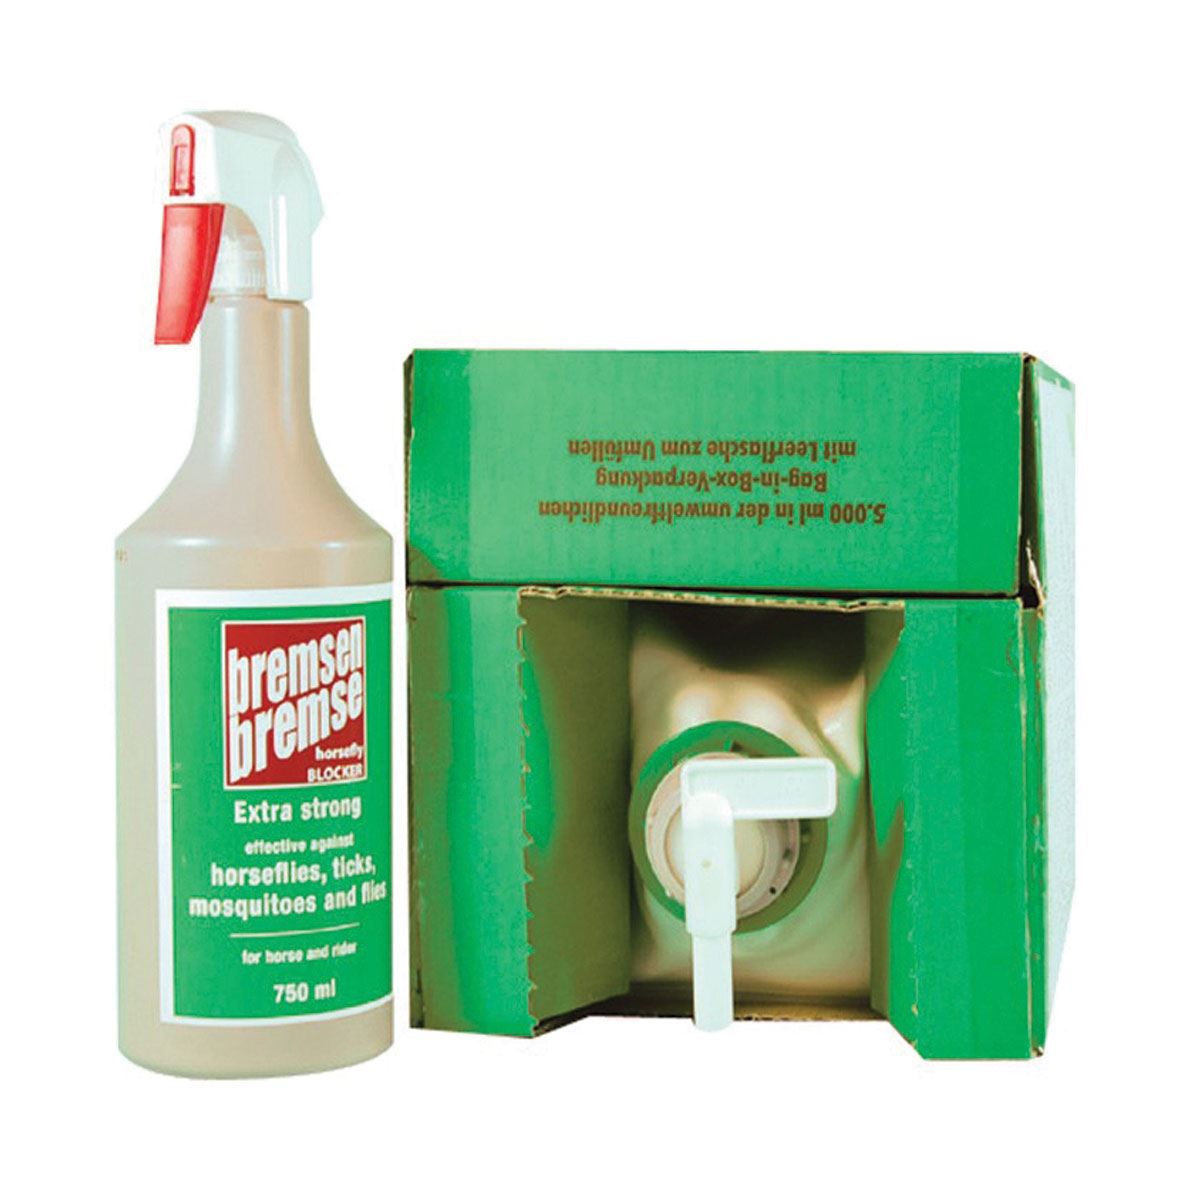 Bremsen Long Acting Fly Spray - Just Horse Riders